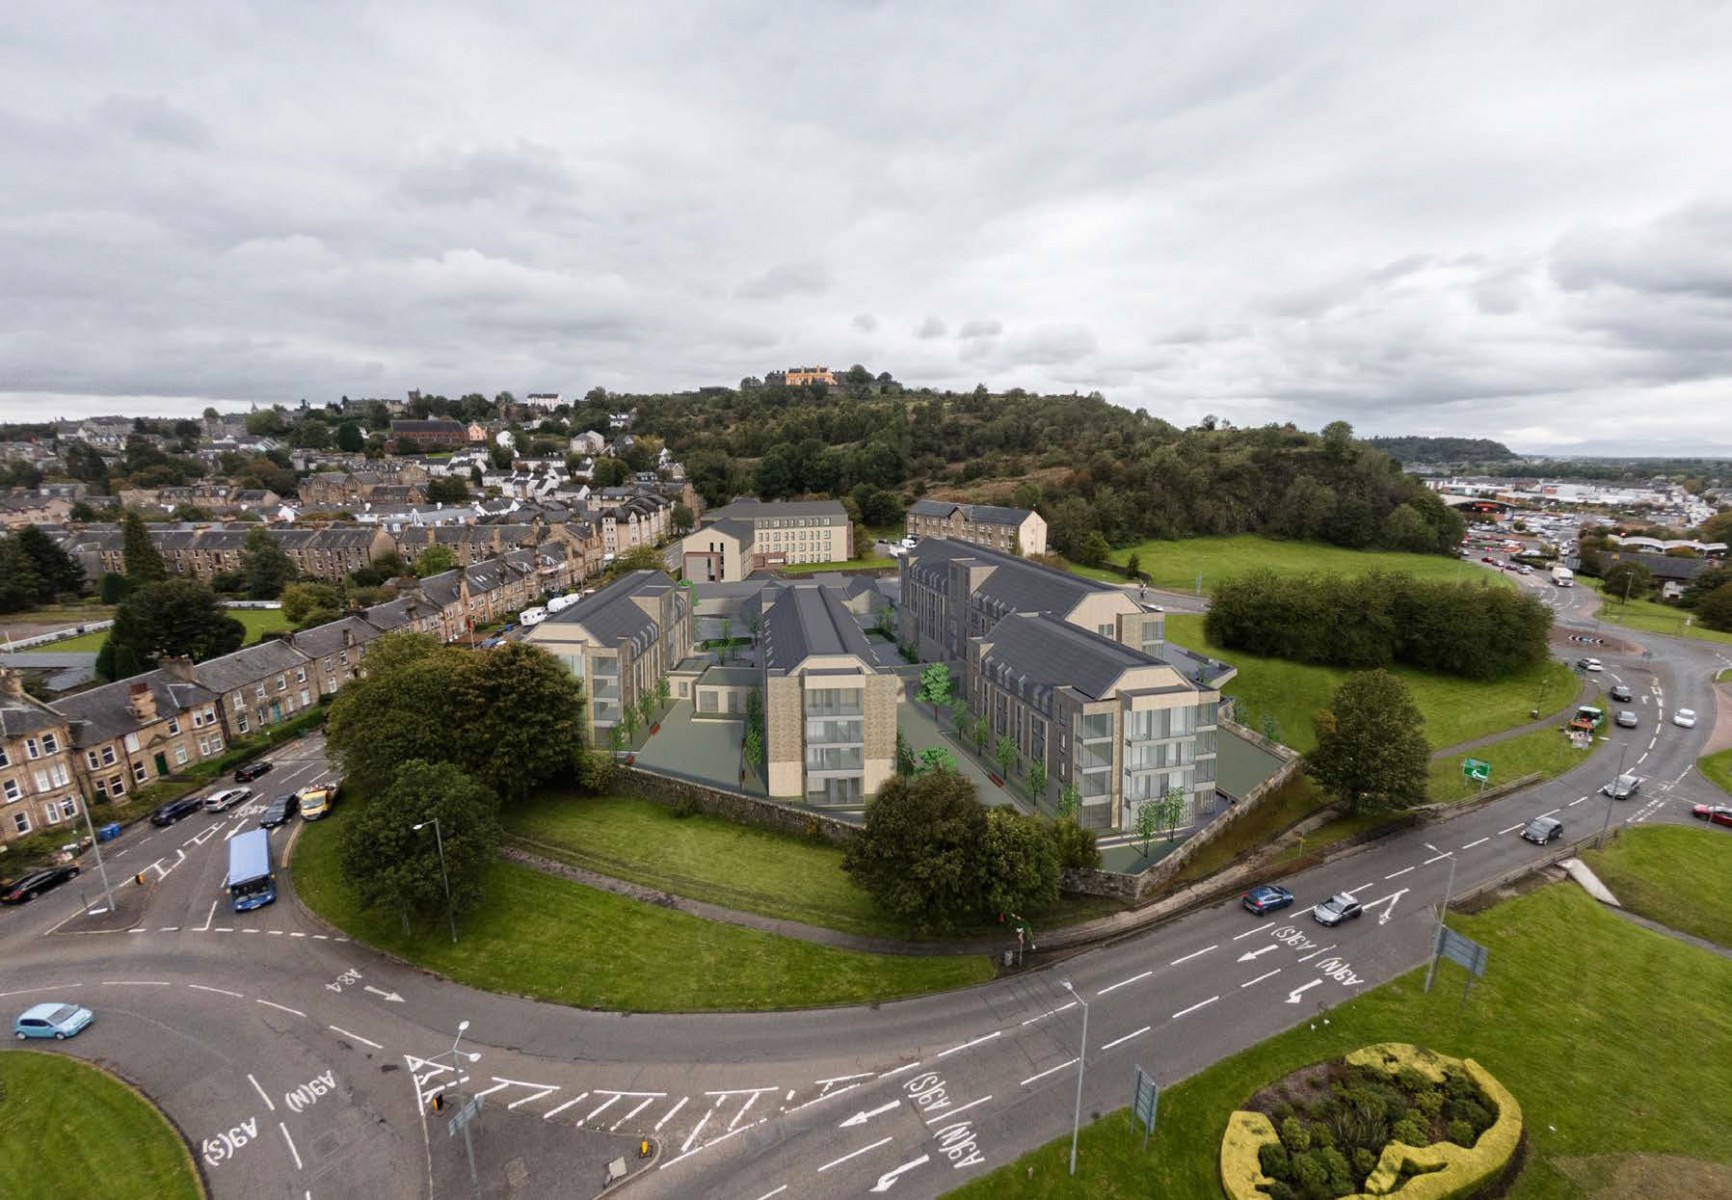 Mixed-use care home and student vision unveiled for Raploch